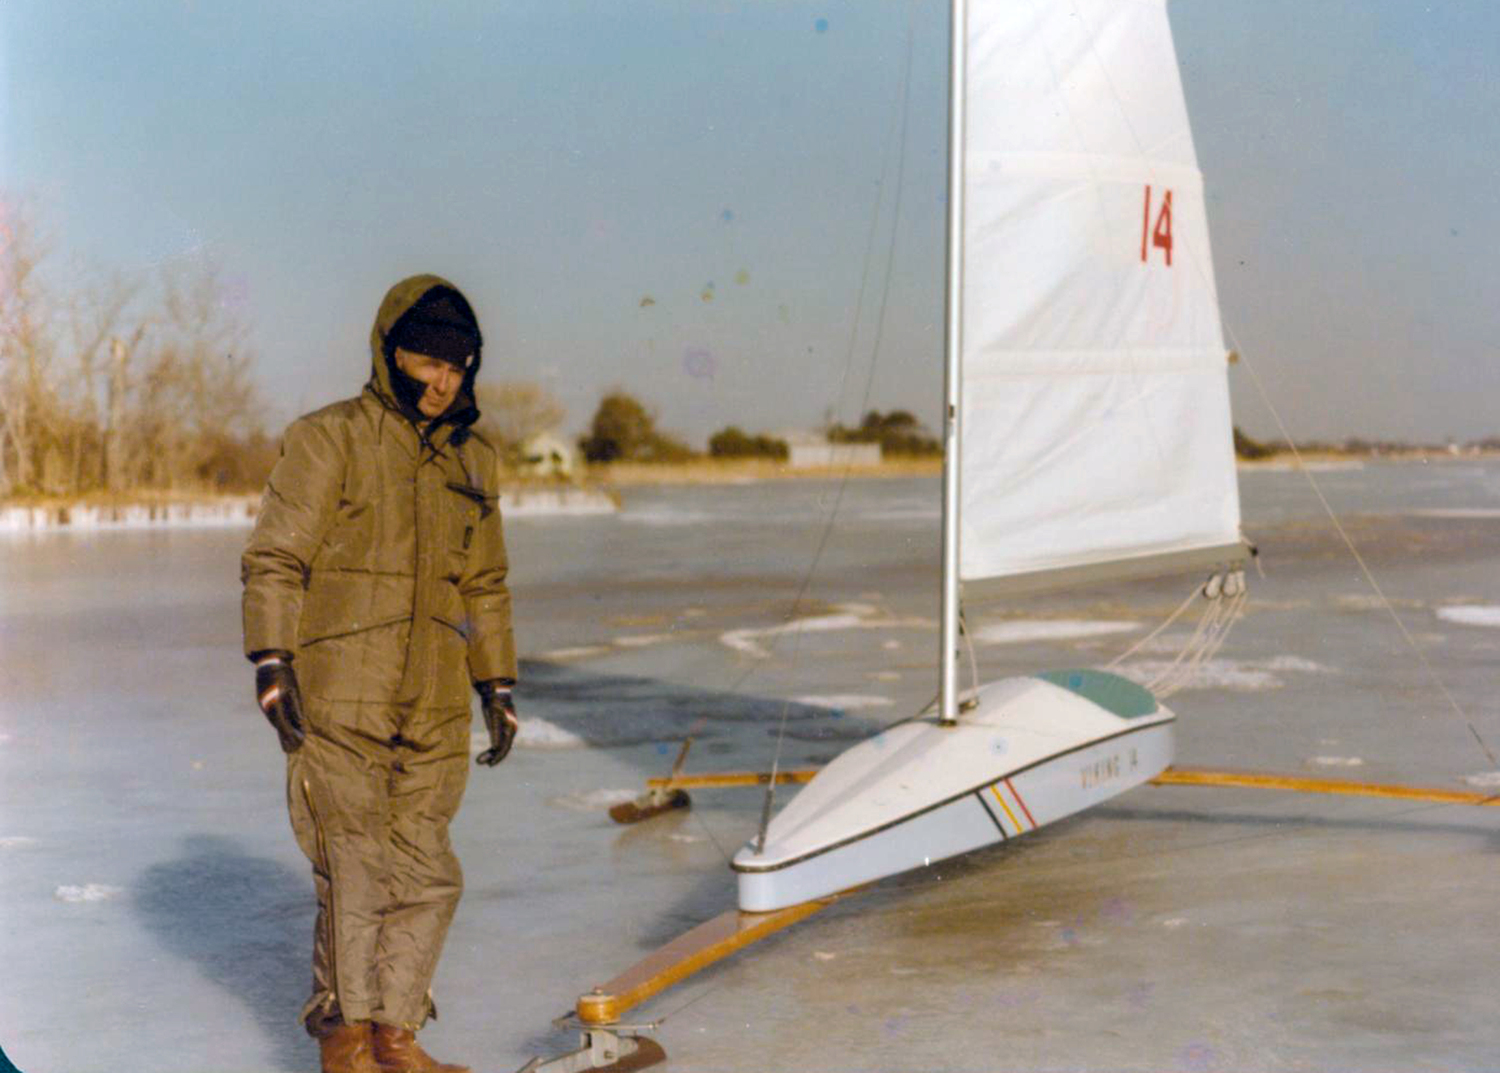 Harvey Morris with his new ice boat on Mecox Bay in the winter of 1977.